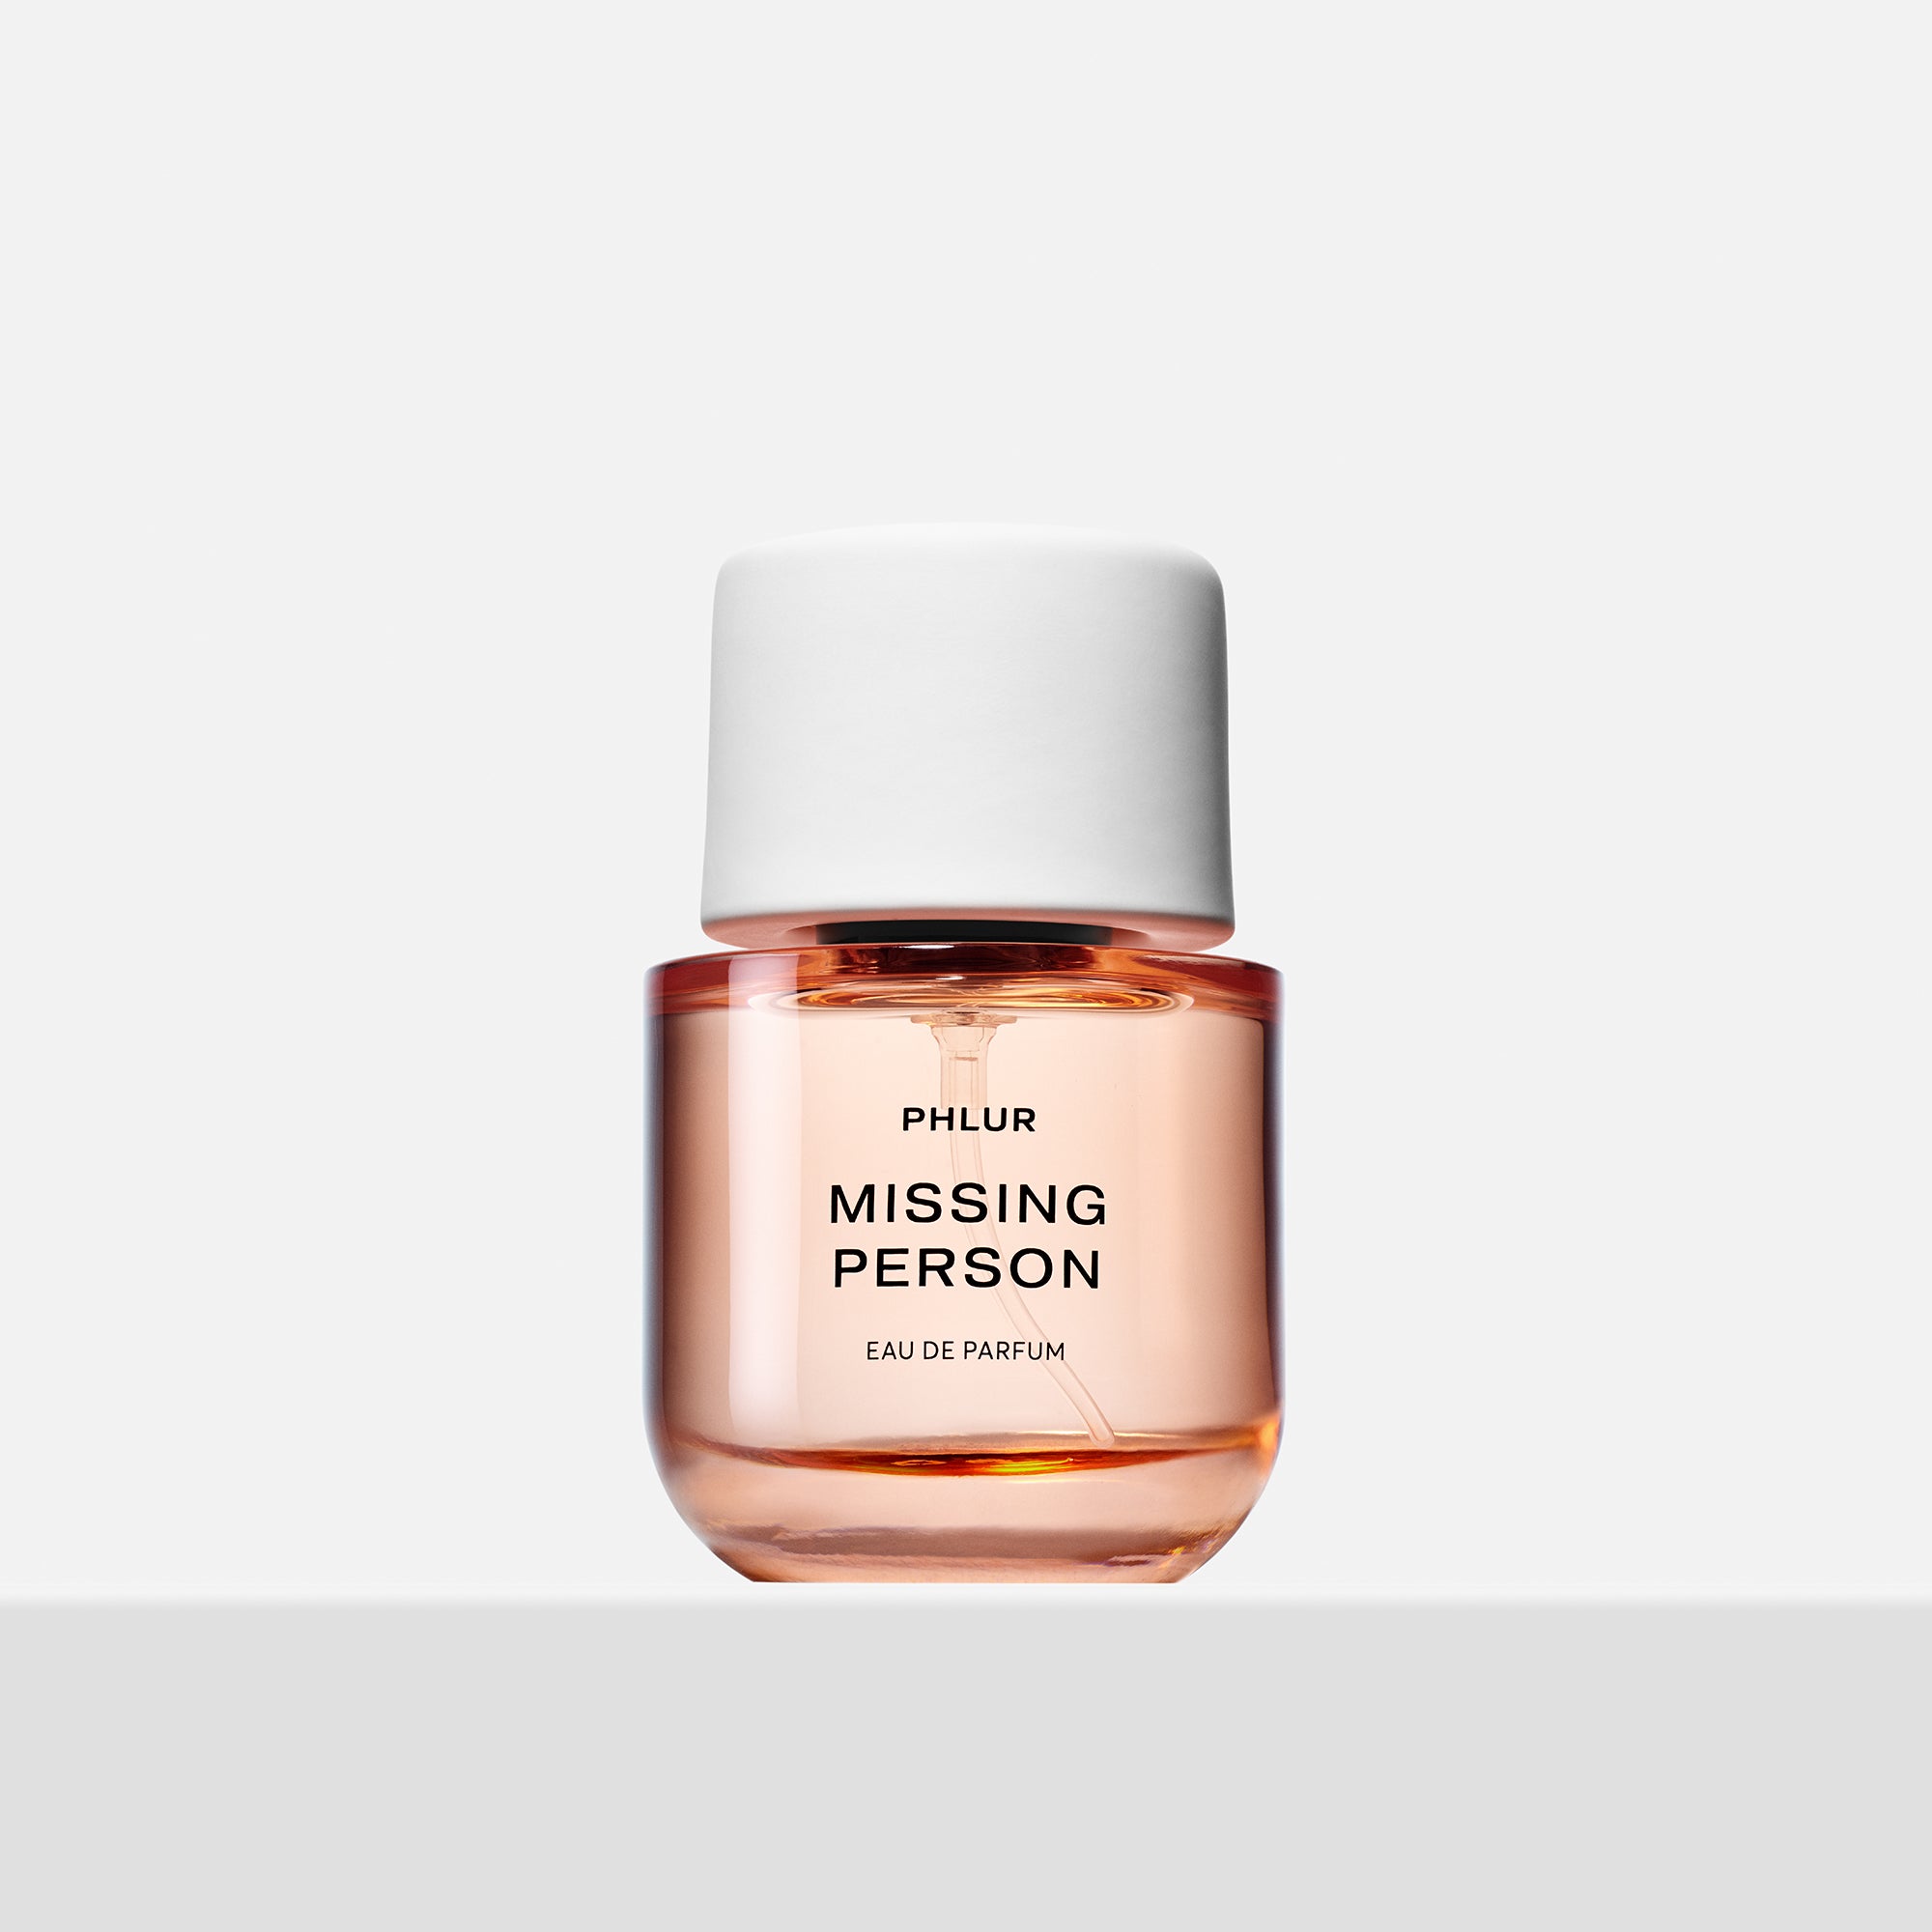 Missing Person Perfume - Full Size Fragrance - Phlur